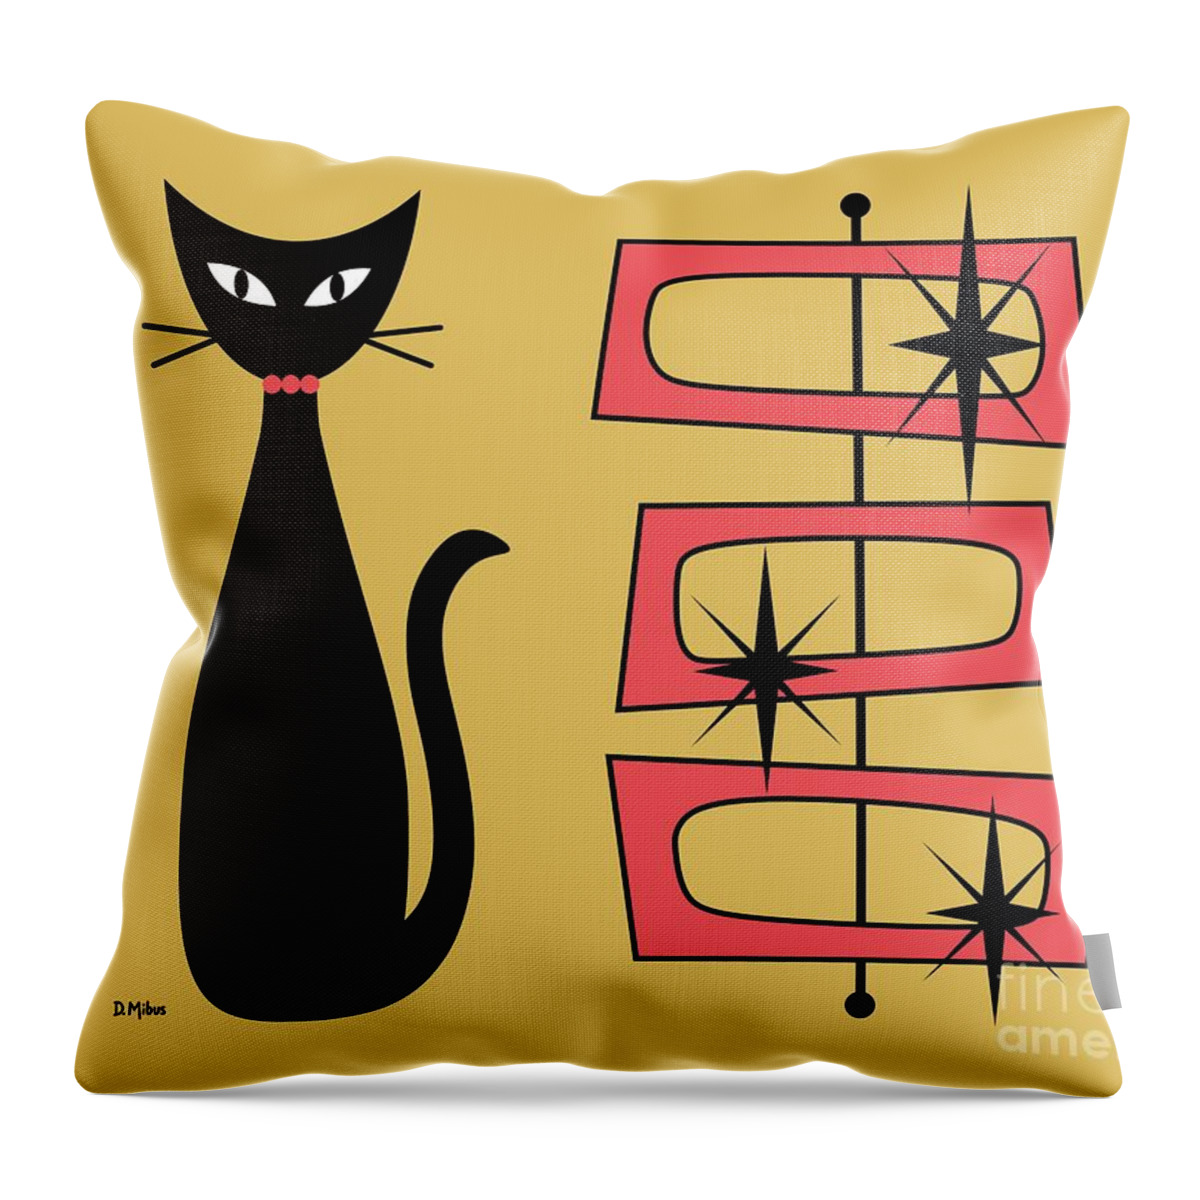 Mid Century Cat Throw Pillow featuring the digital art Black Cat with Mod Rectangles Yellow by Donna Mibus